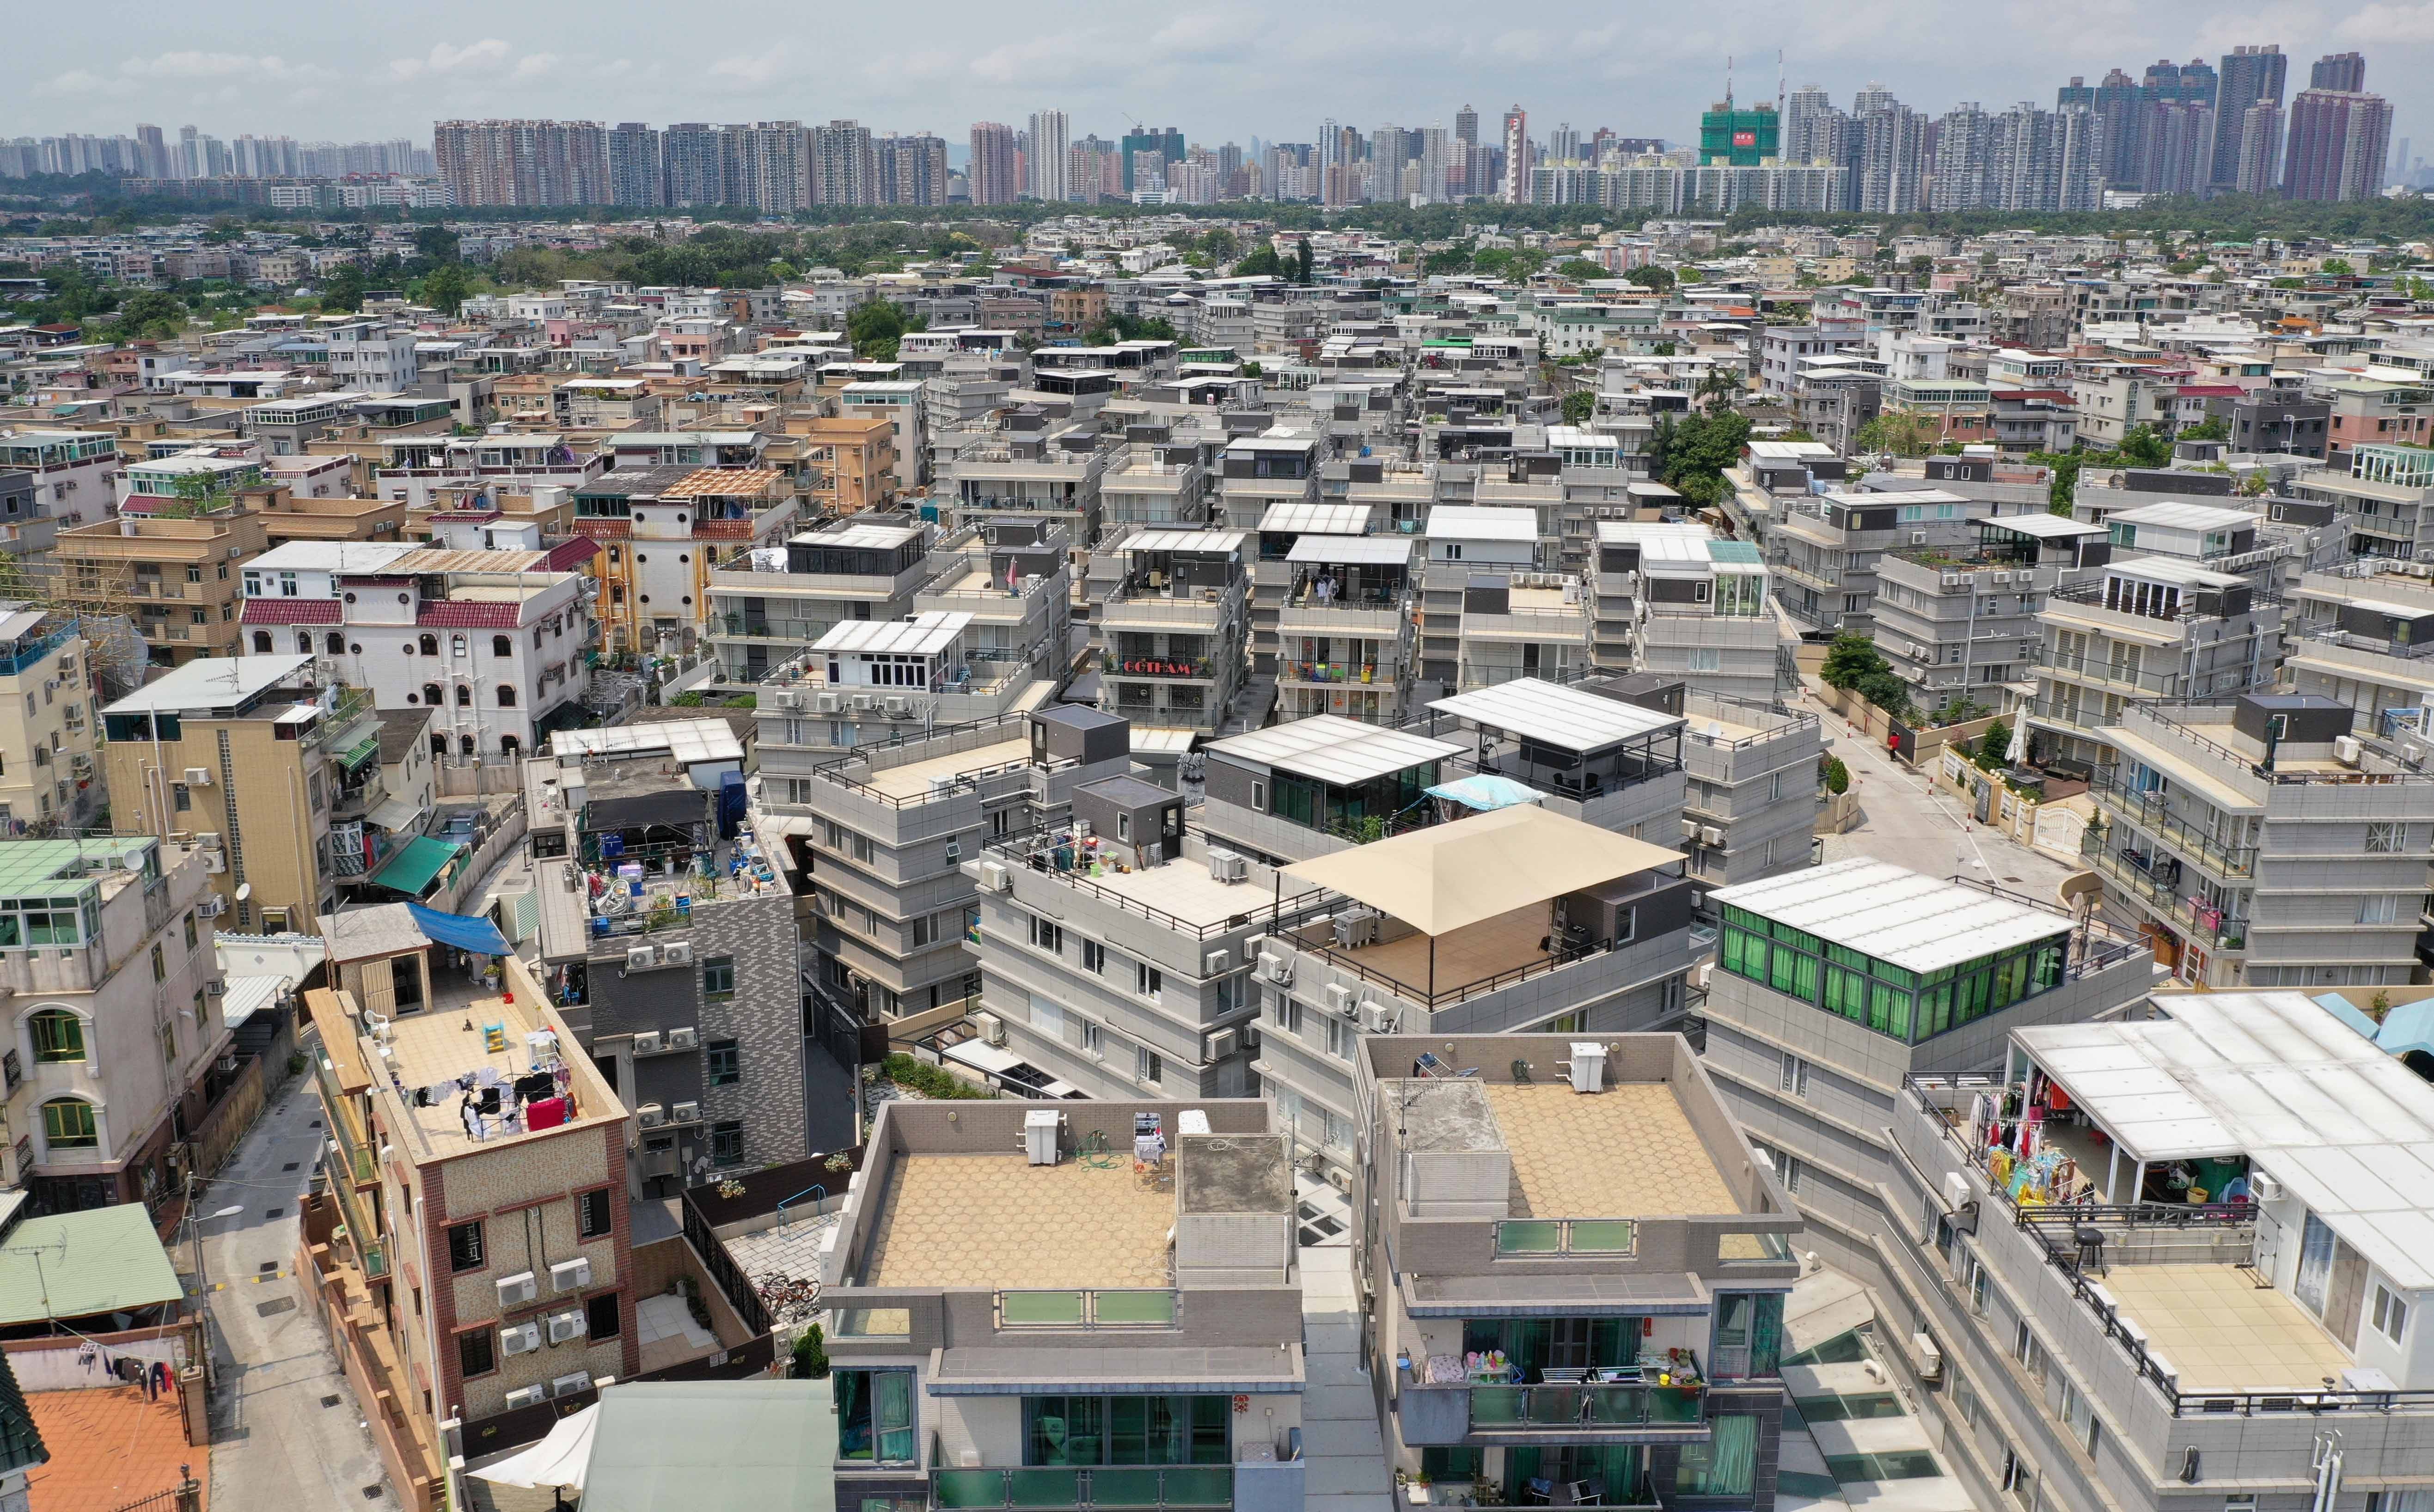 Indigenous village houses in Yuen Long are seen in an aerial photo in April 2019. Photo: Winson Wong